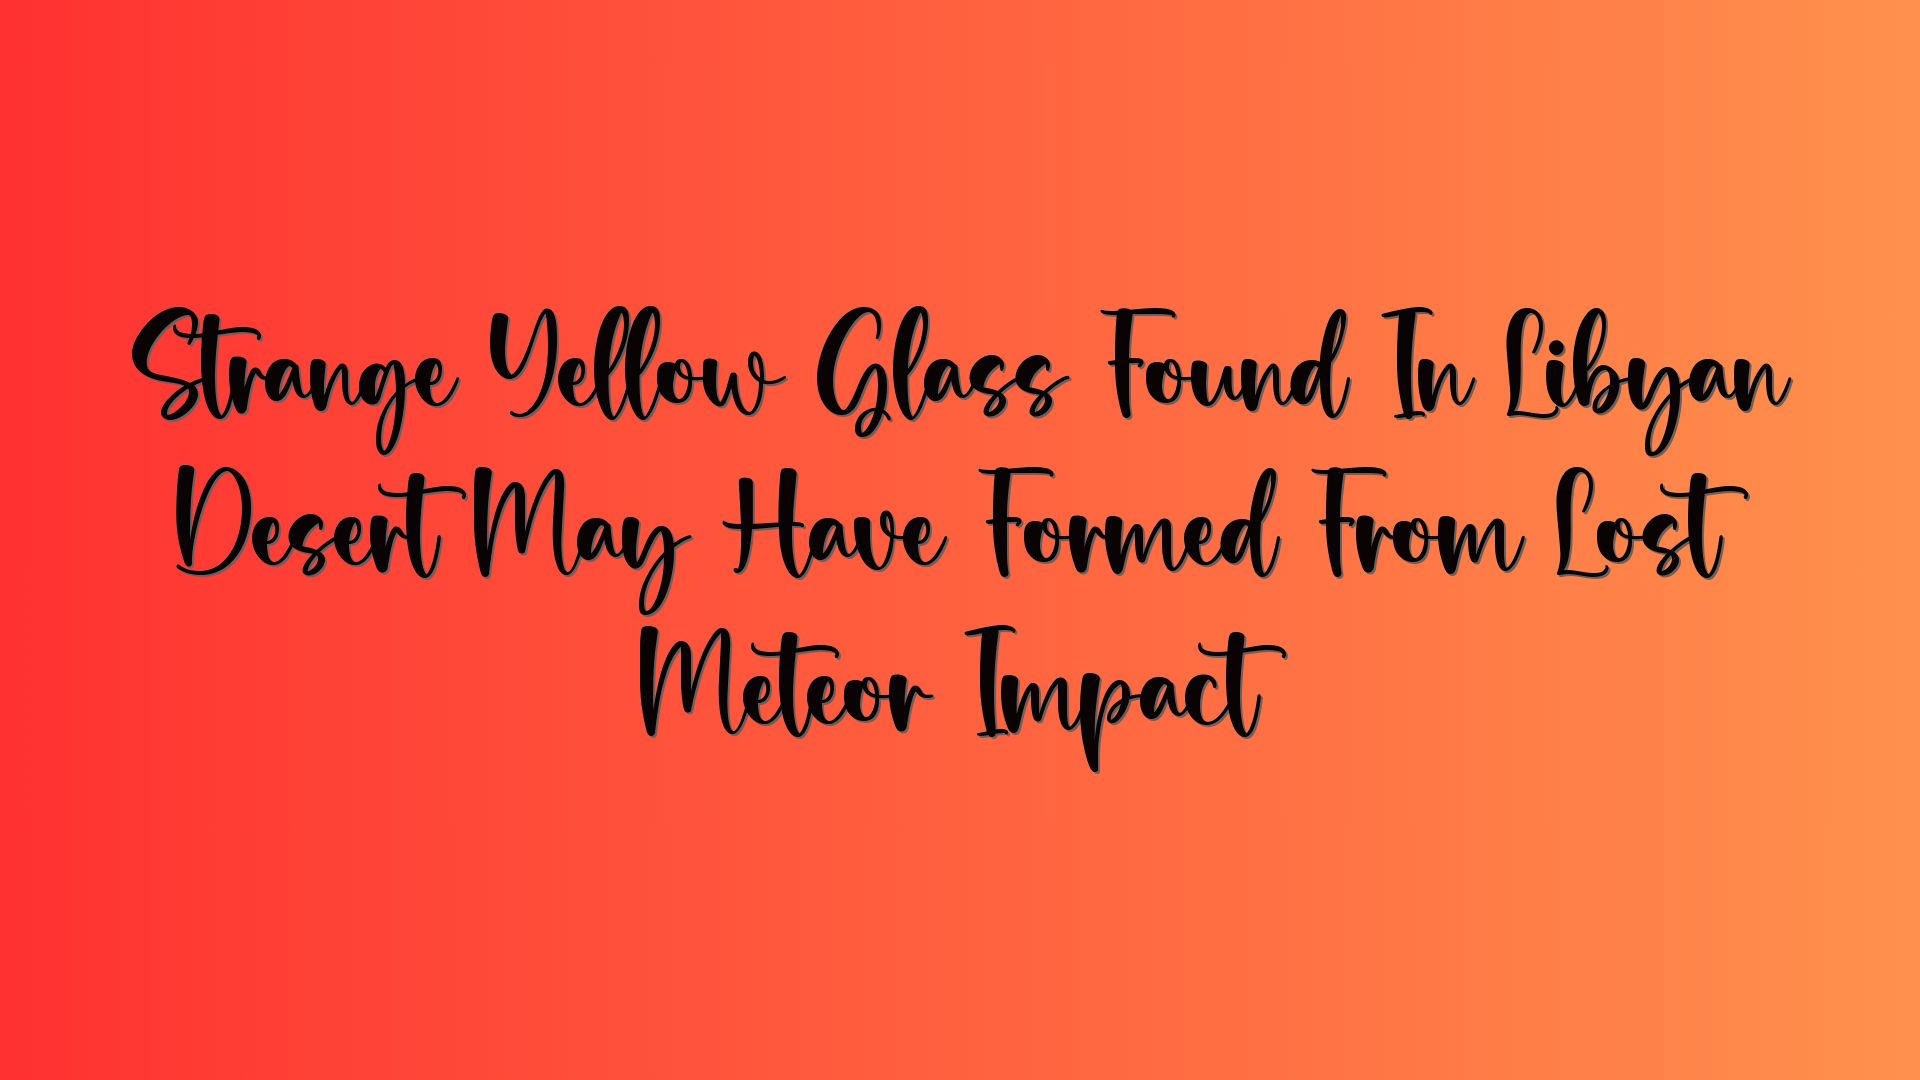 Strange Yellow Glass Found In Libyan Desert May Have Formed From Lost Meteor Impact